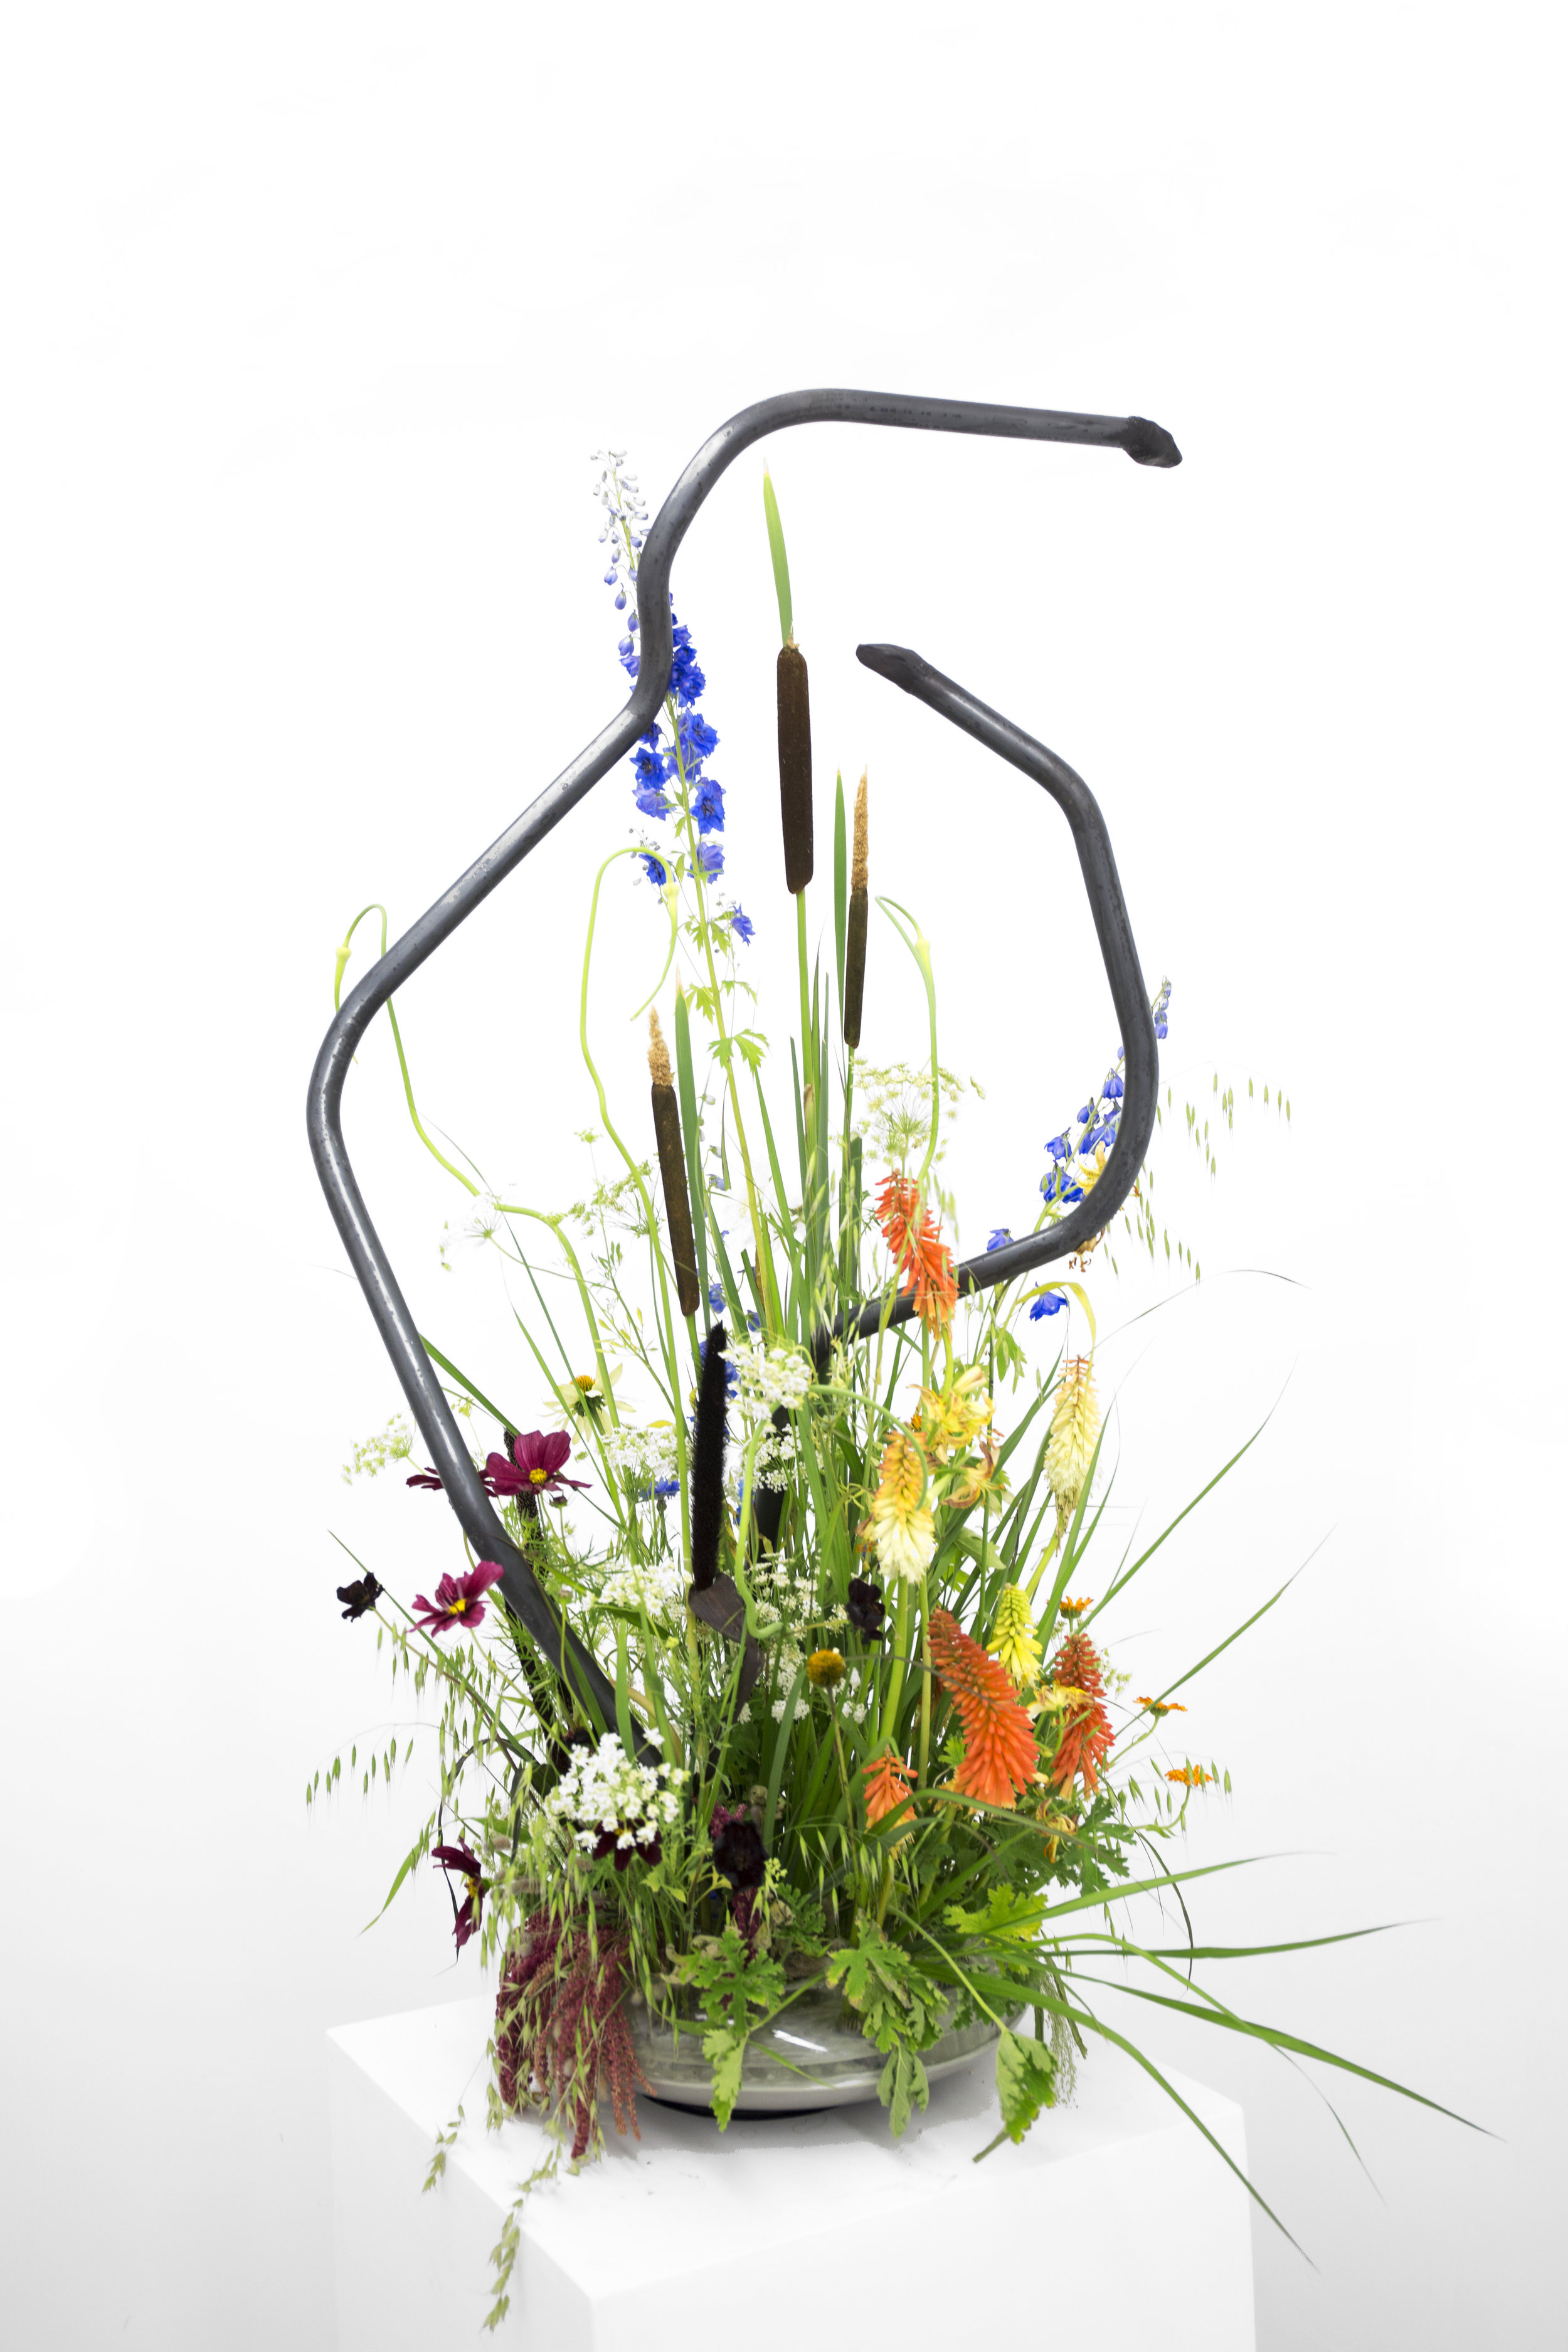  Mating Dance, in collaboration with Micah Rosenblatt and Alex Crowder 55"x 30" Cold Rolled Solid Steel, Glass, Rotating Motor, Cement, Delphinium, Queen Anne's Lace, Cat Tail, Sea Oat Grass, Chocolate Scabiosa, White Nigella, Amaranthus, Geranium le